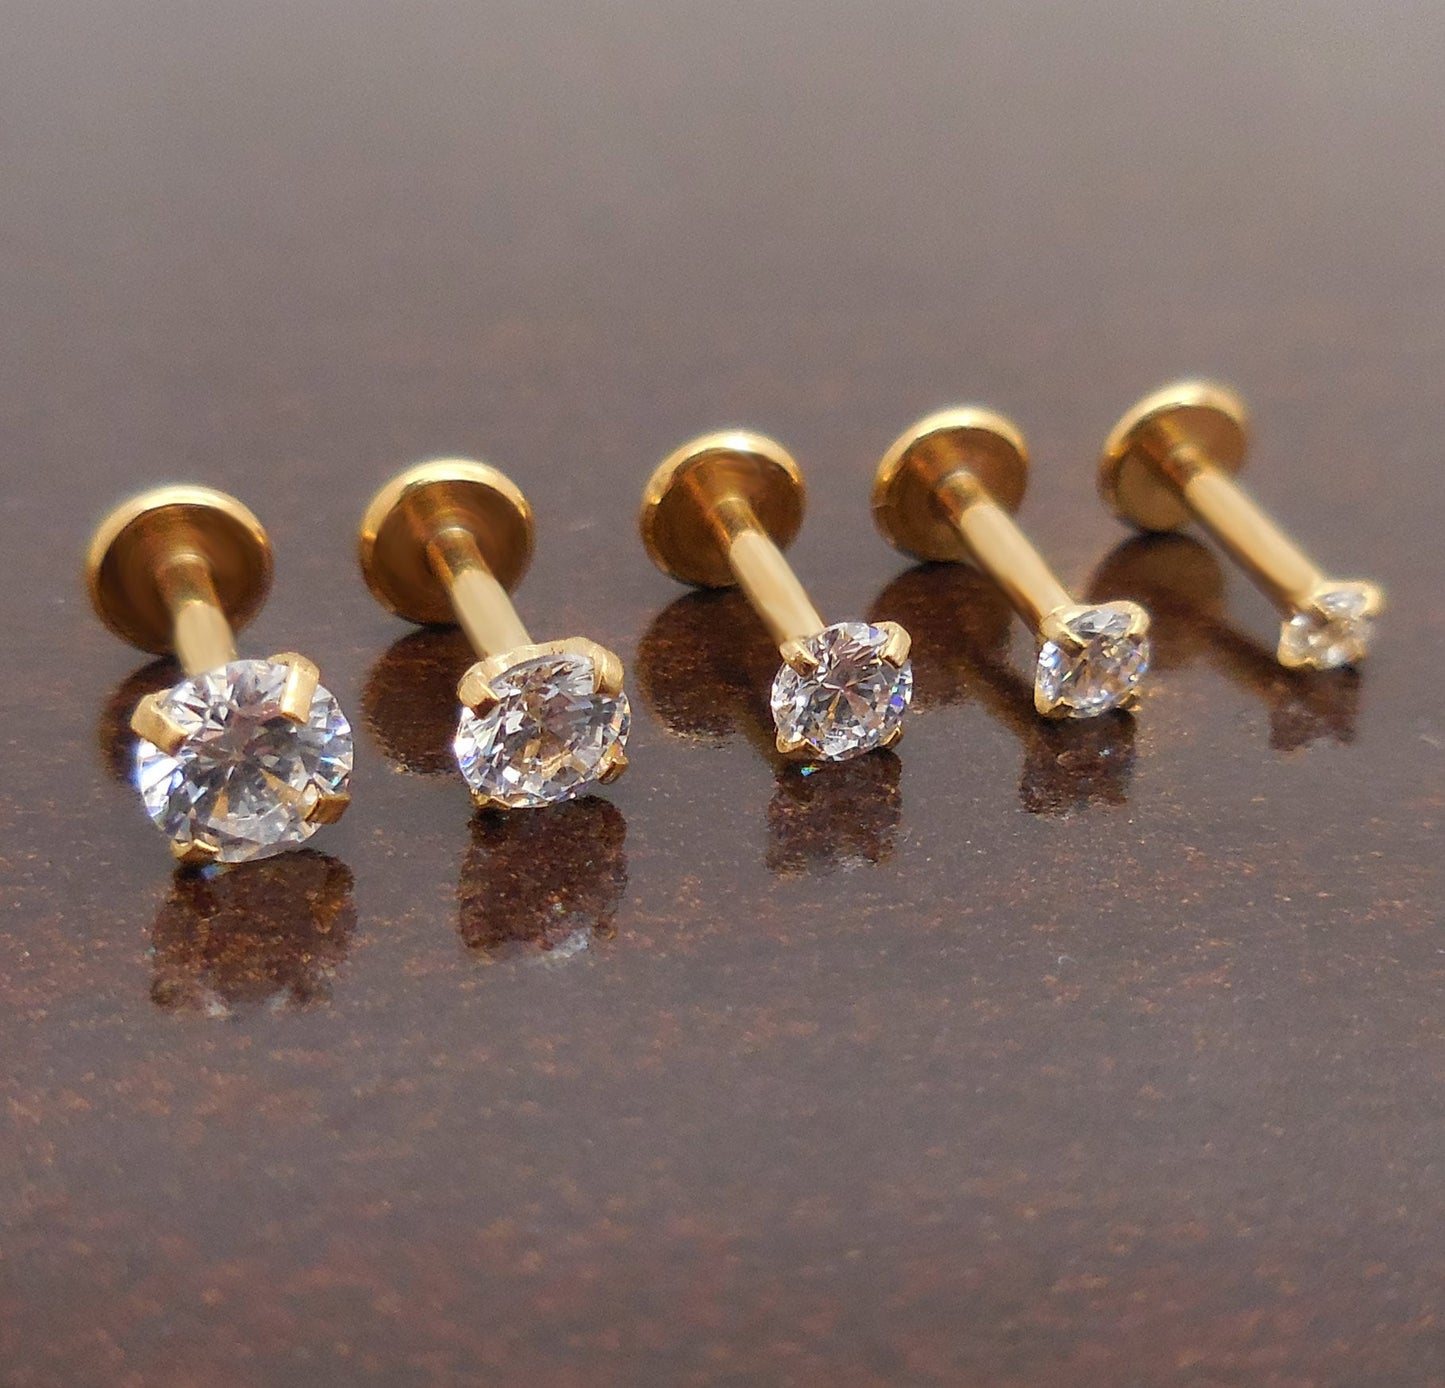 16g 2-4mm Tragus 6mm-8mm Threadless Push Pin Labret Nose Ring Cartilage Earrings Gold Tone Titanium Prong Set Clear CZ Stone Triple Helix